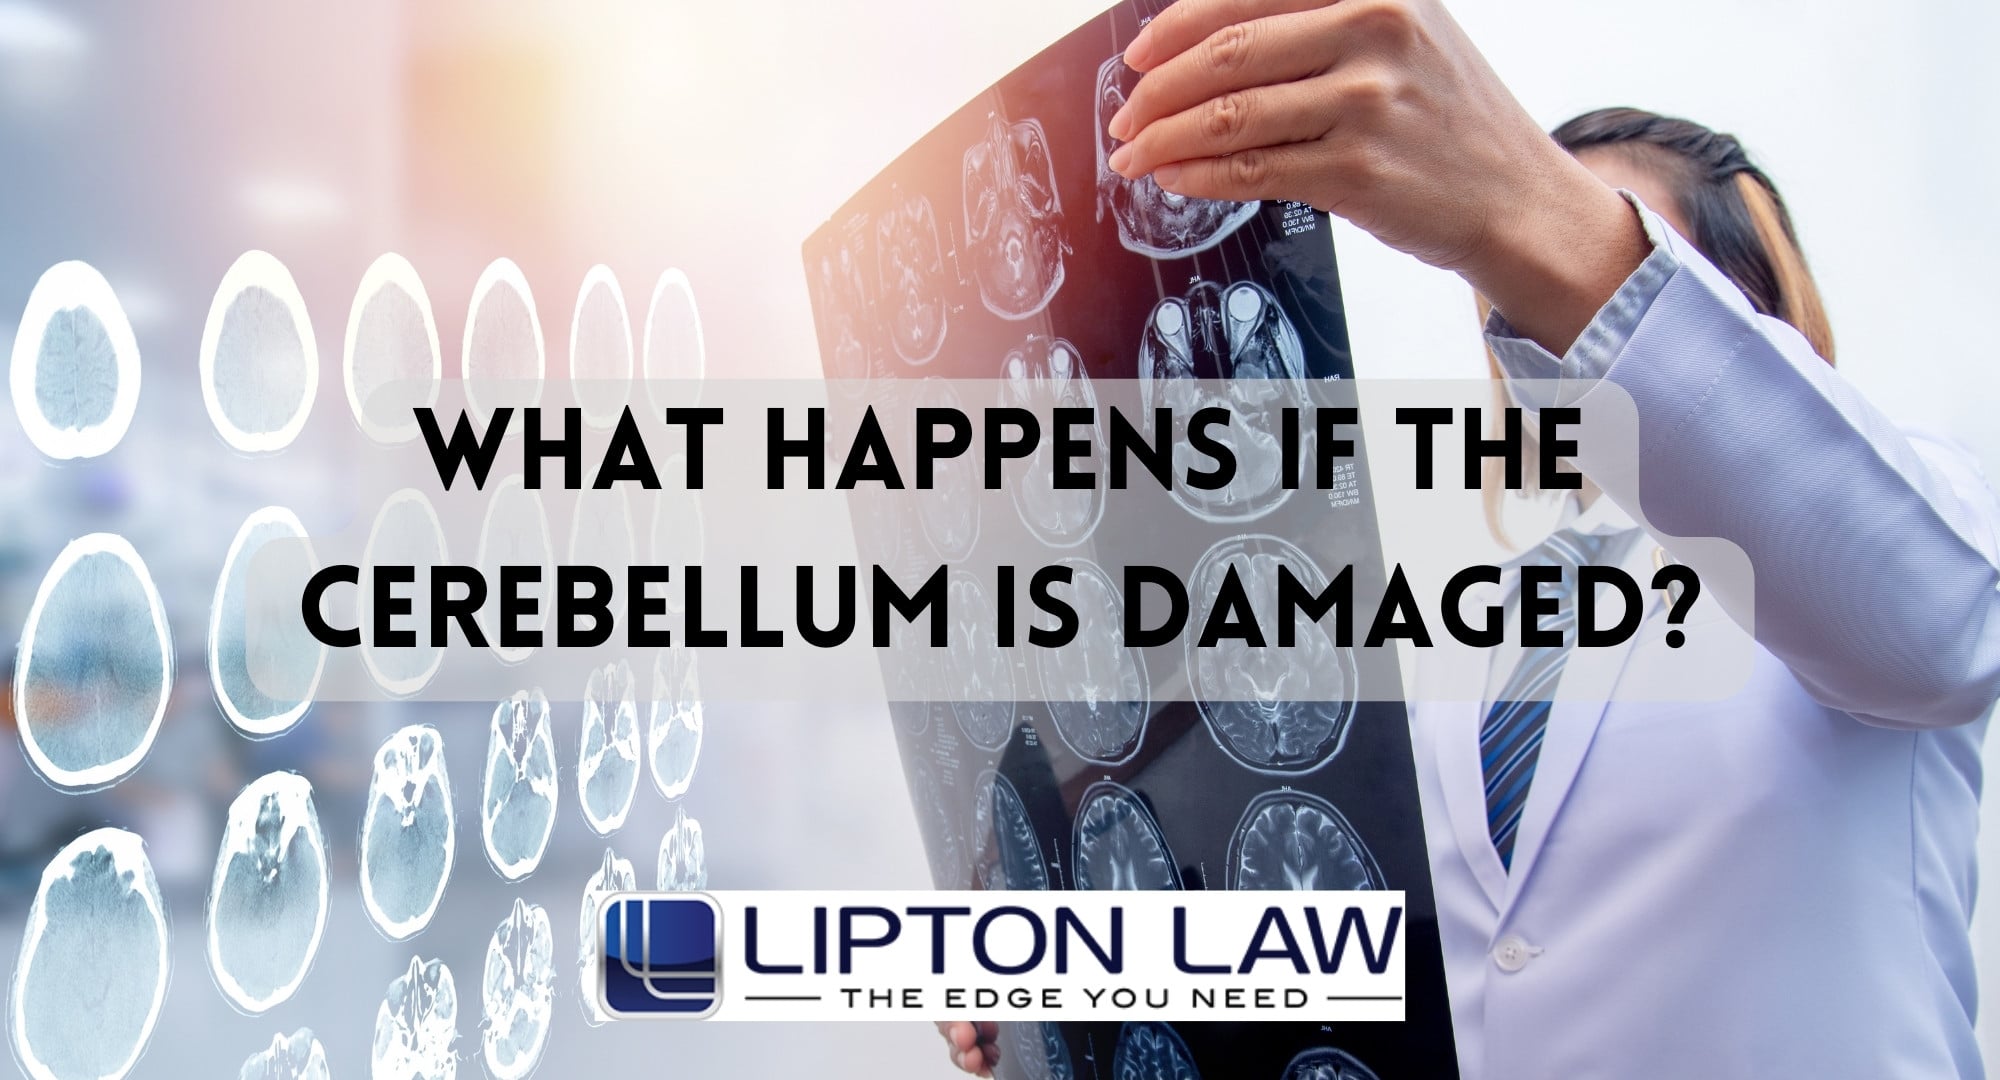 What Happens if the Cerebellum is Damaged